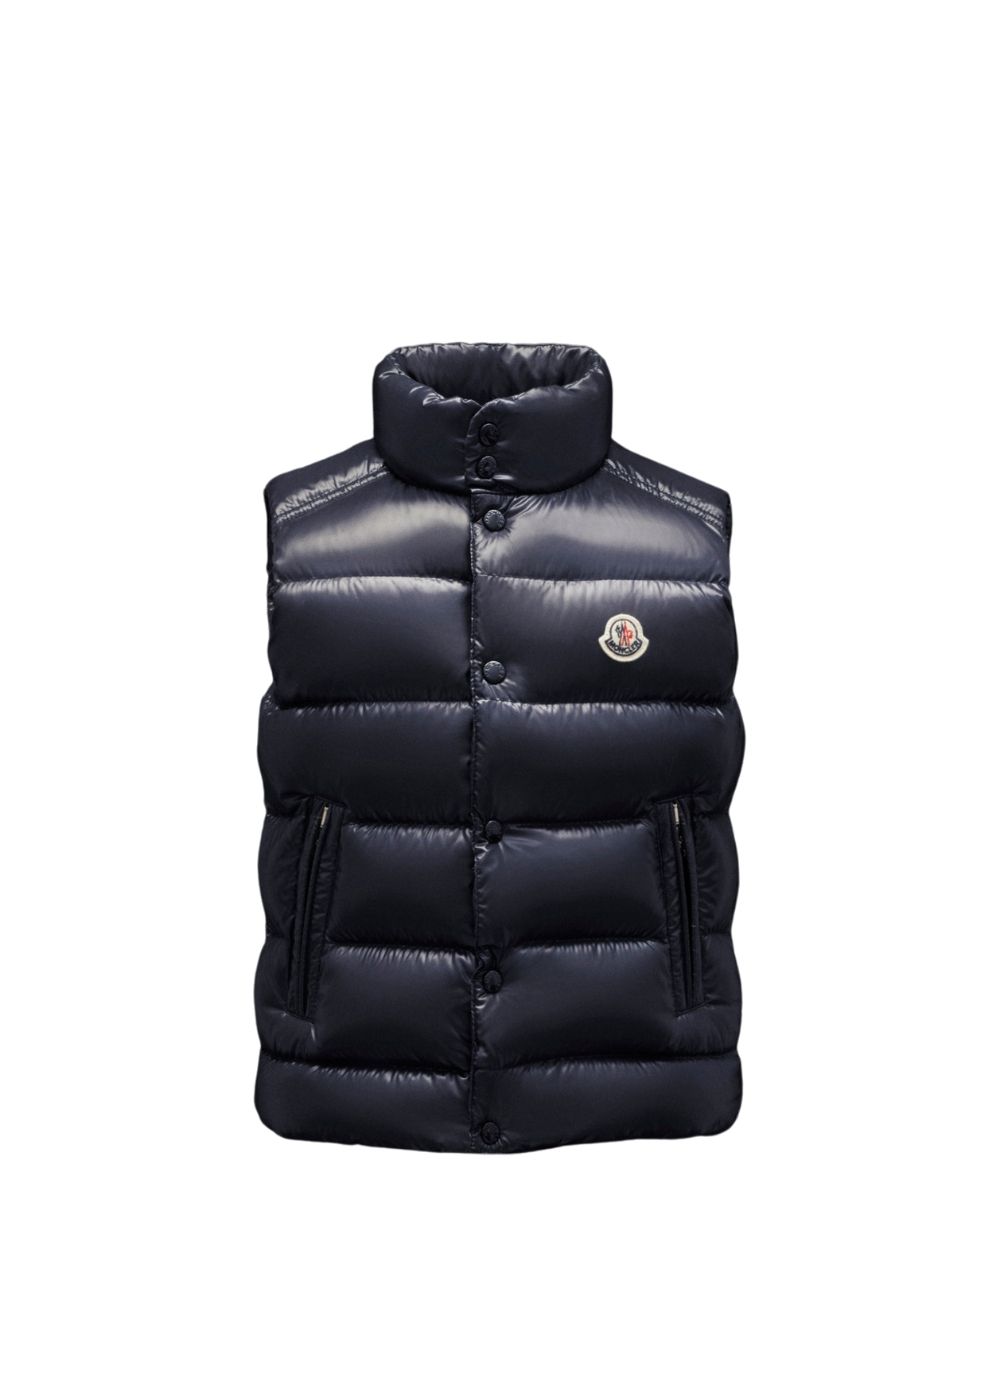 Featured image for “MONCLER GILET TIB”